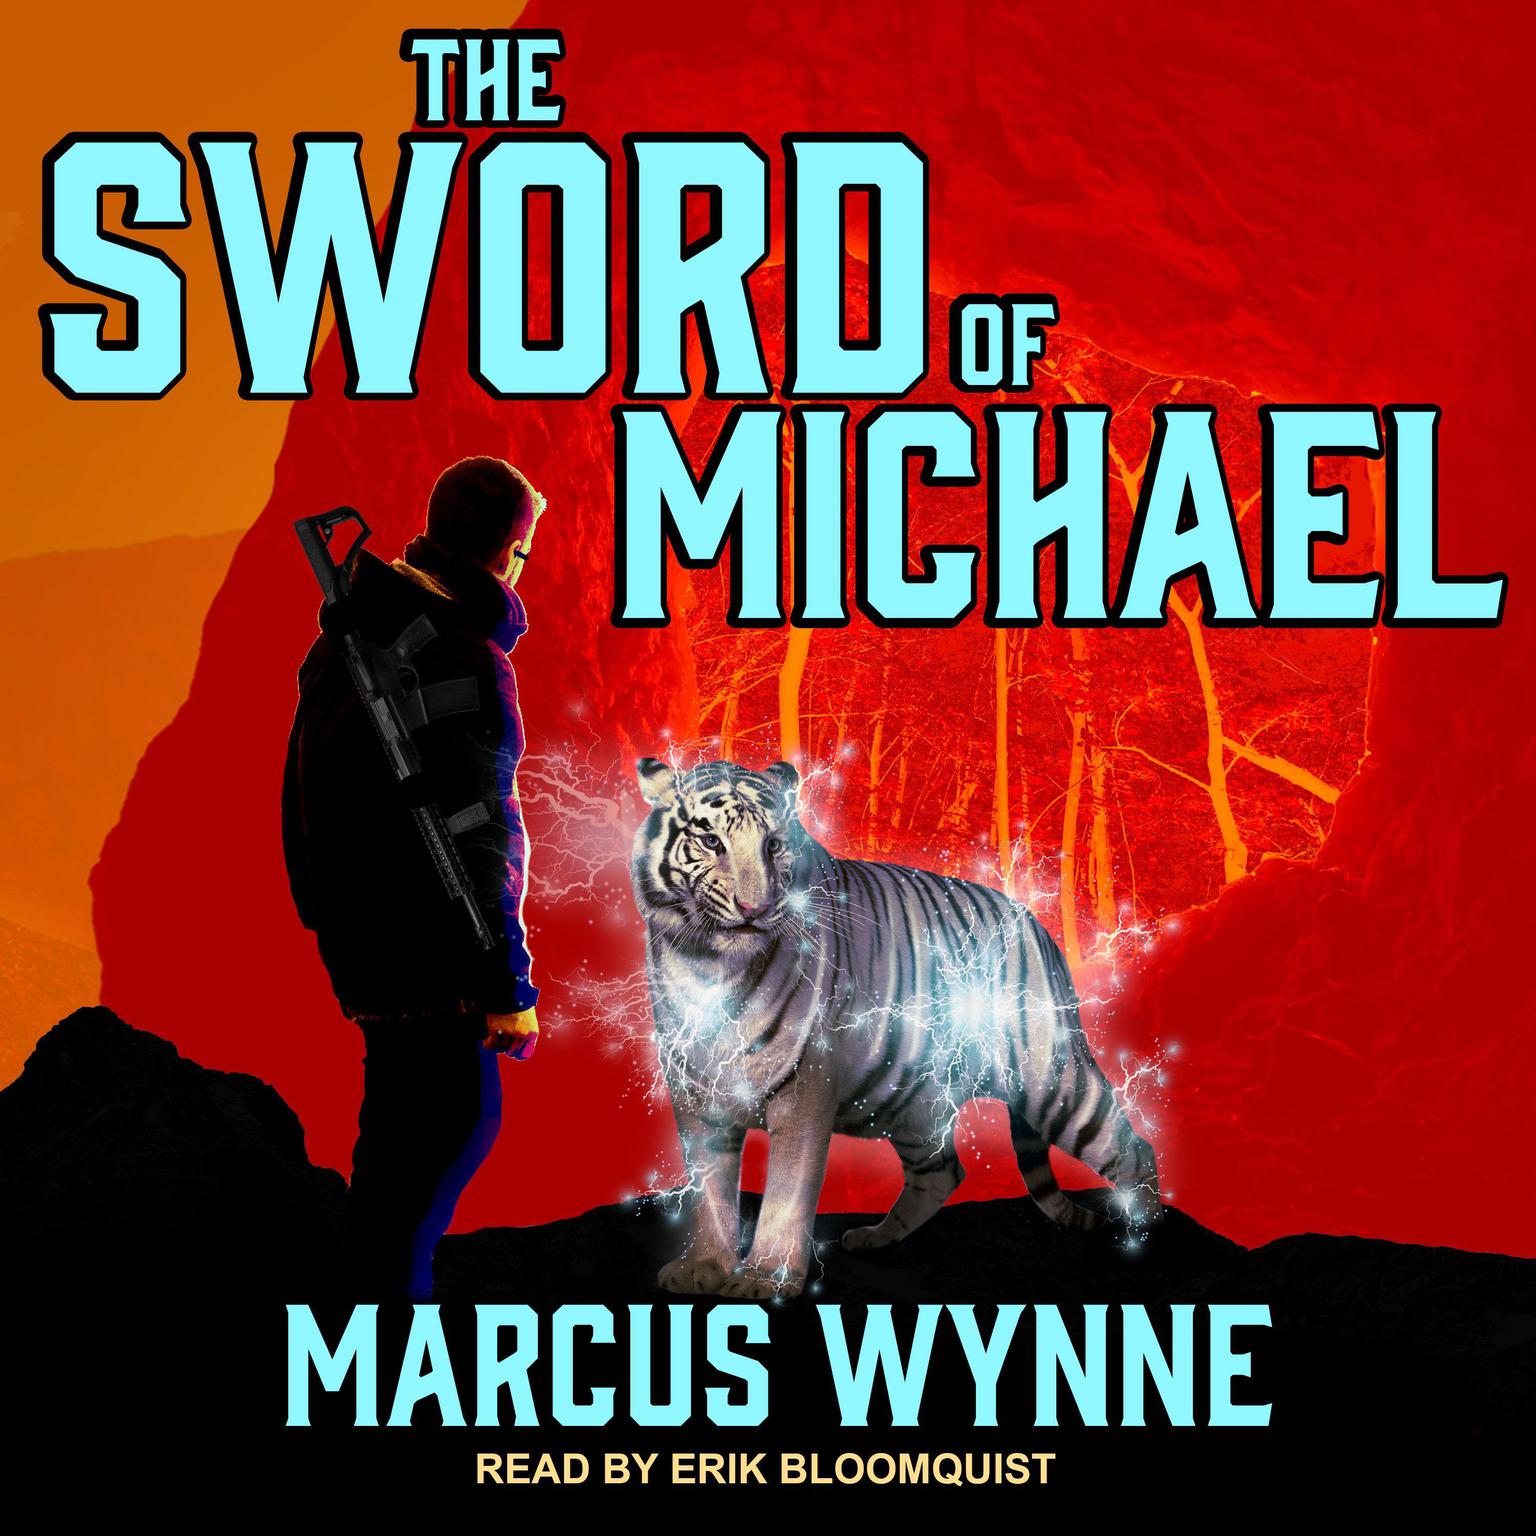 The Sword of Michael Audiobook, by Marcus Wynne